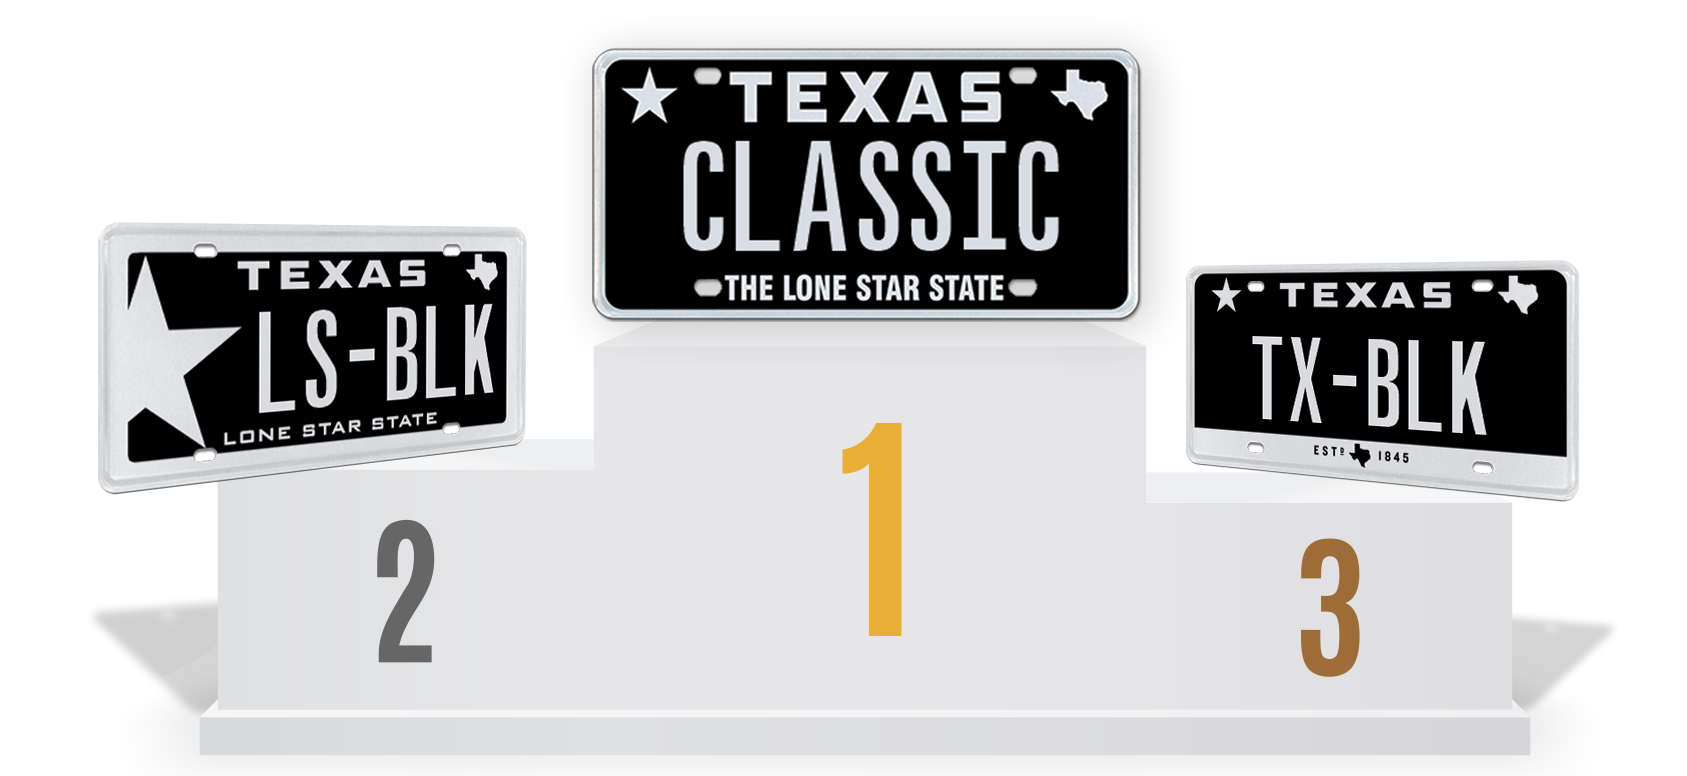 Top 3 Selling Texas Plates for 2017